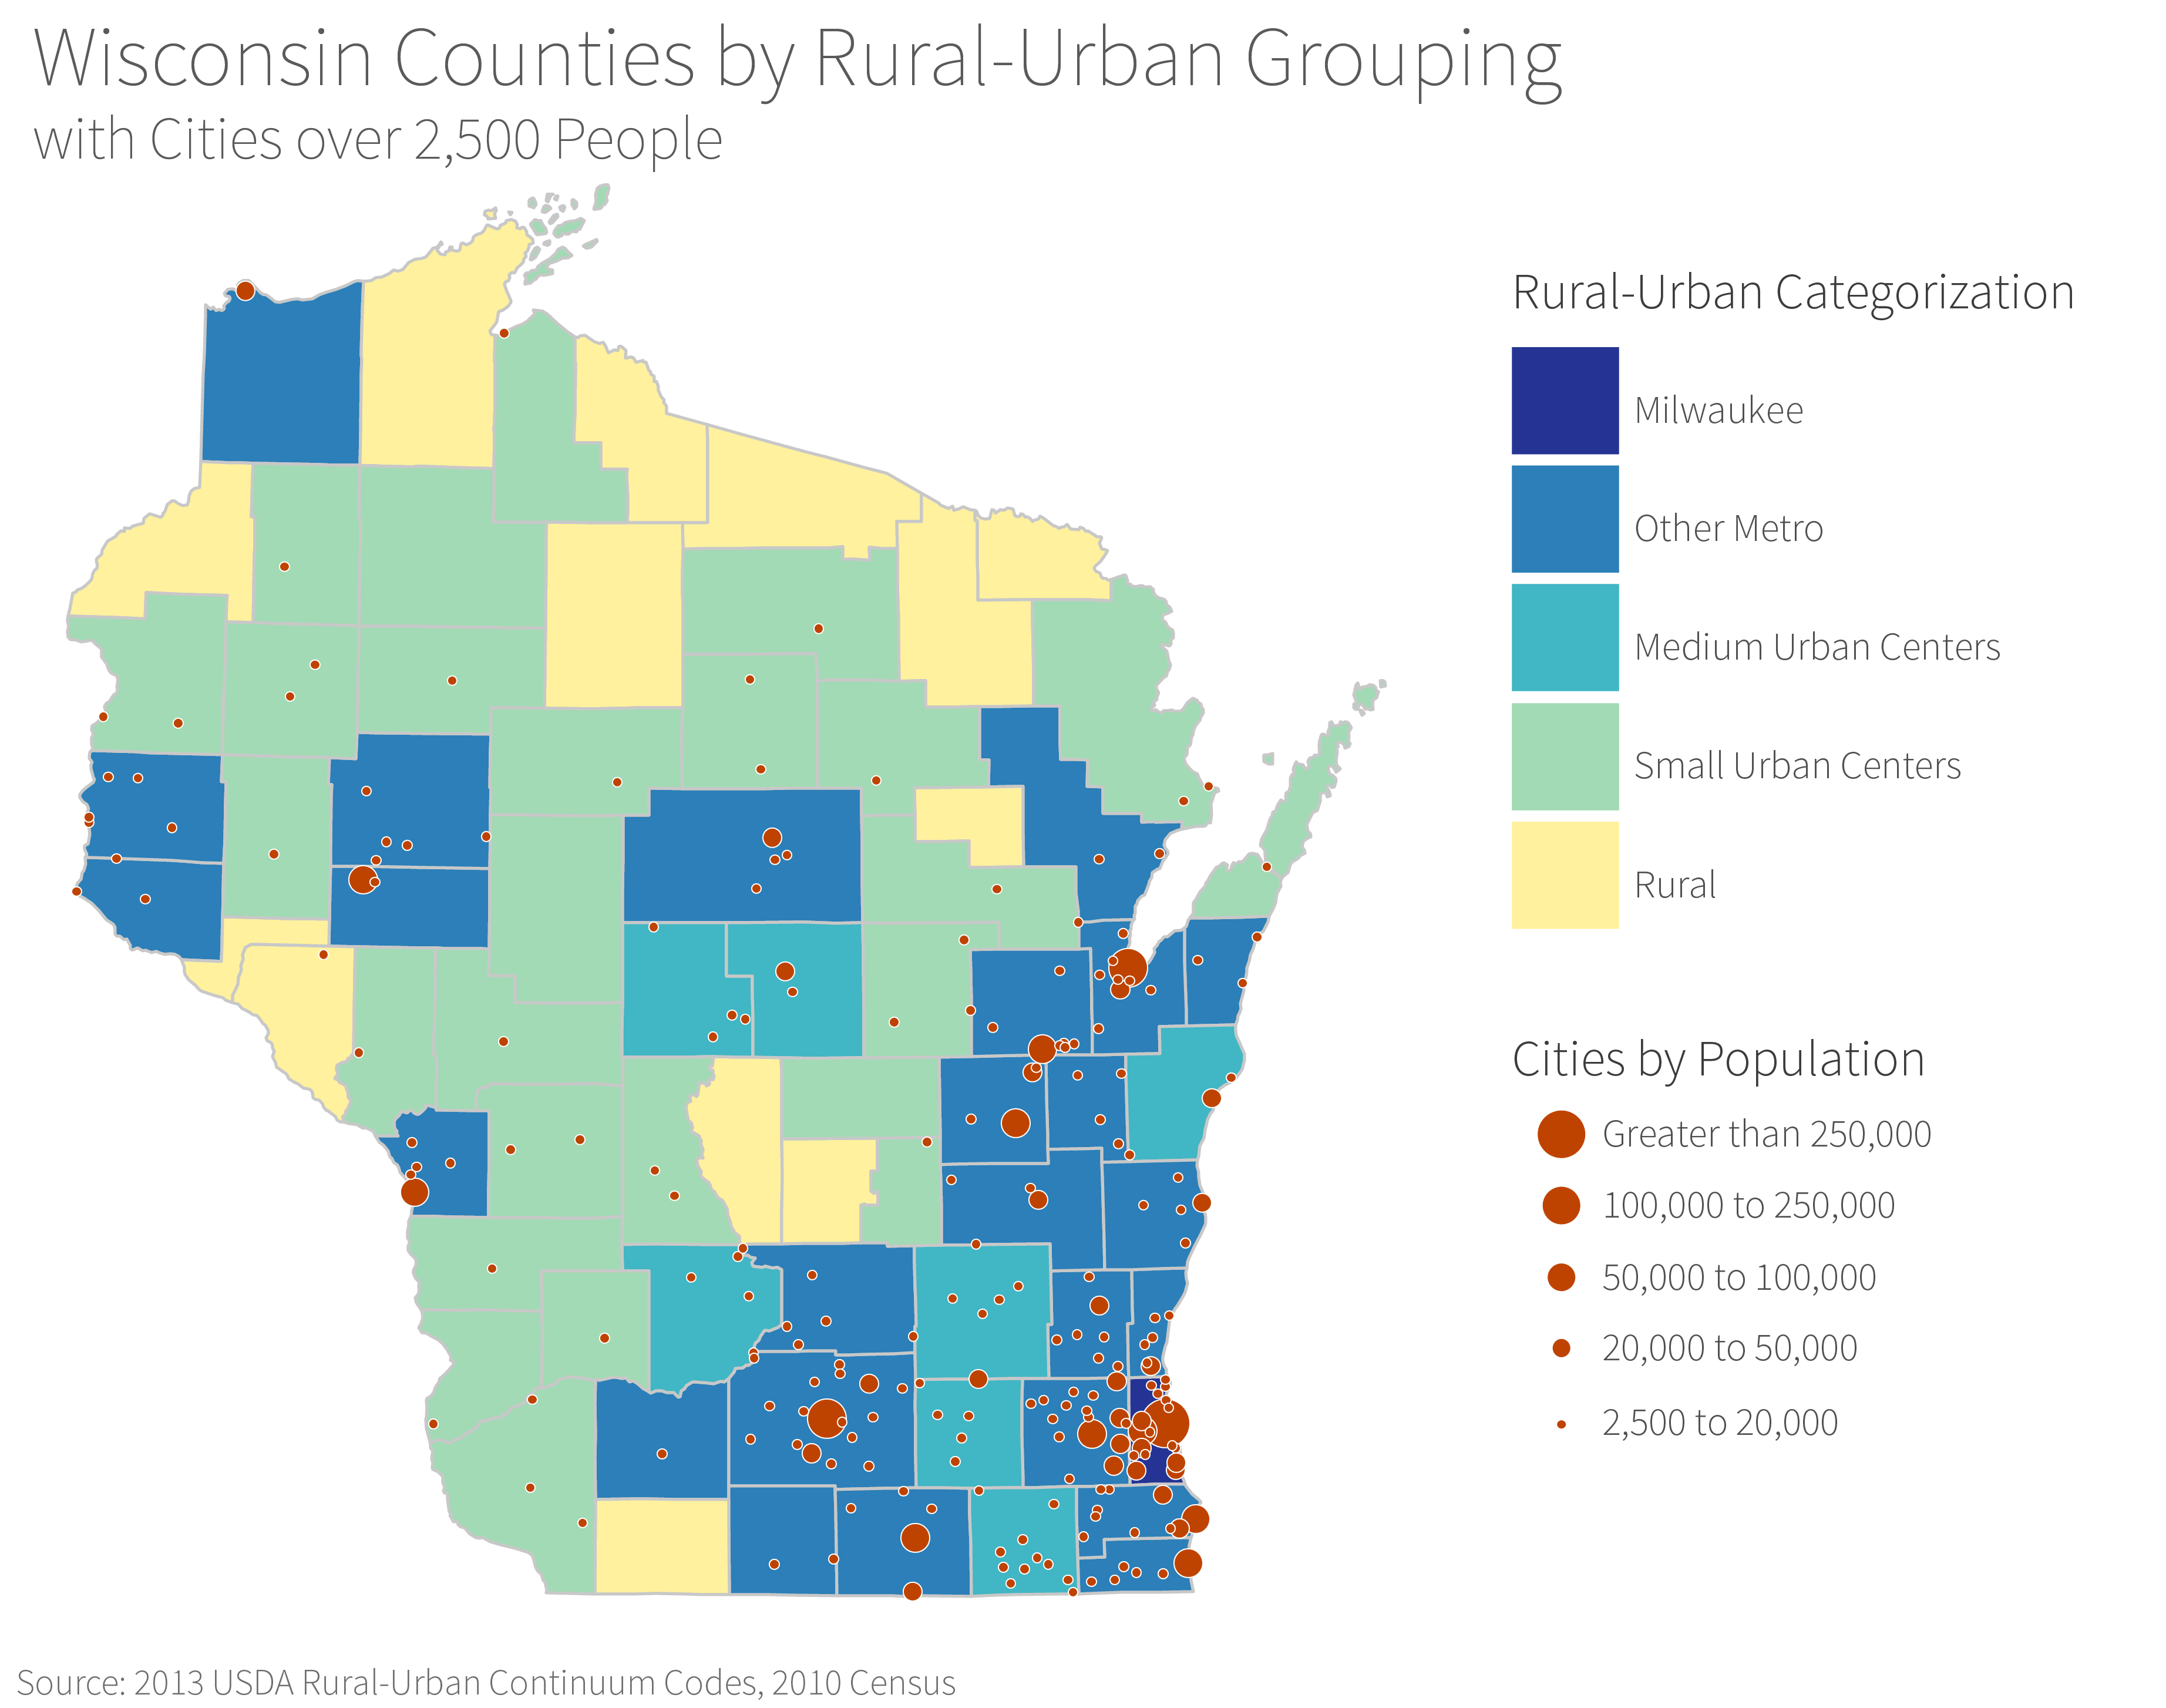 map of Wisconsin showing counties by urban-rural categorization and cities by population size